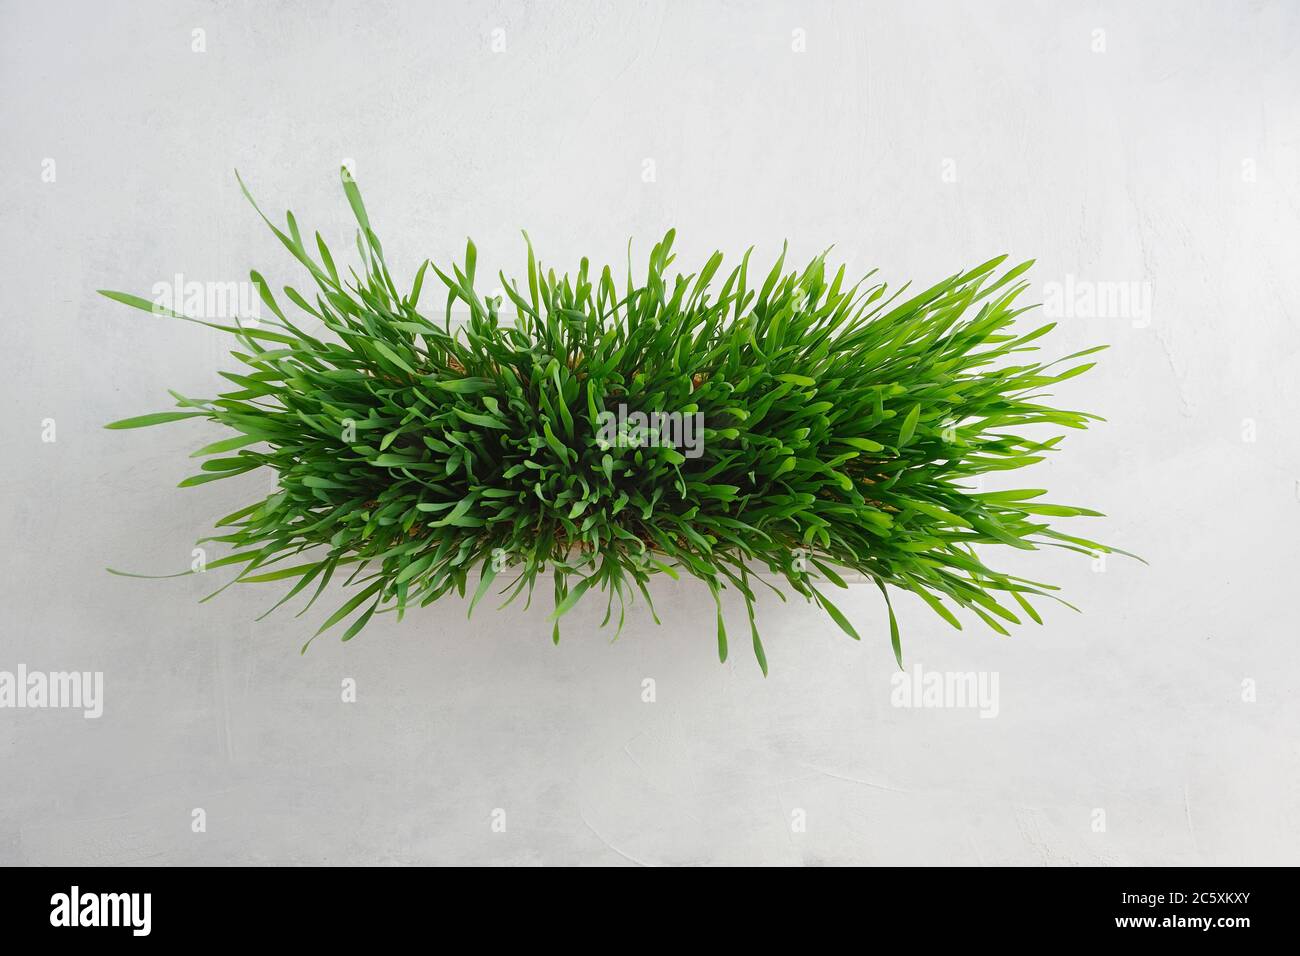 Wheat Grass on the light background. Lifestyle concept.Top view. Horizontal orientation with space for text. Stock Photo